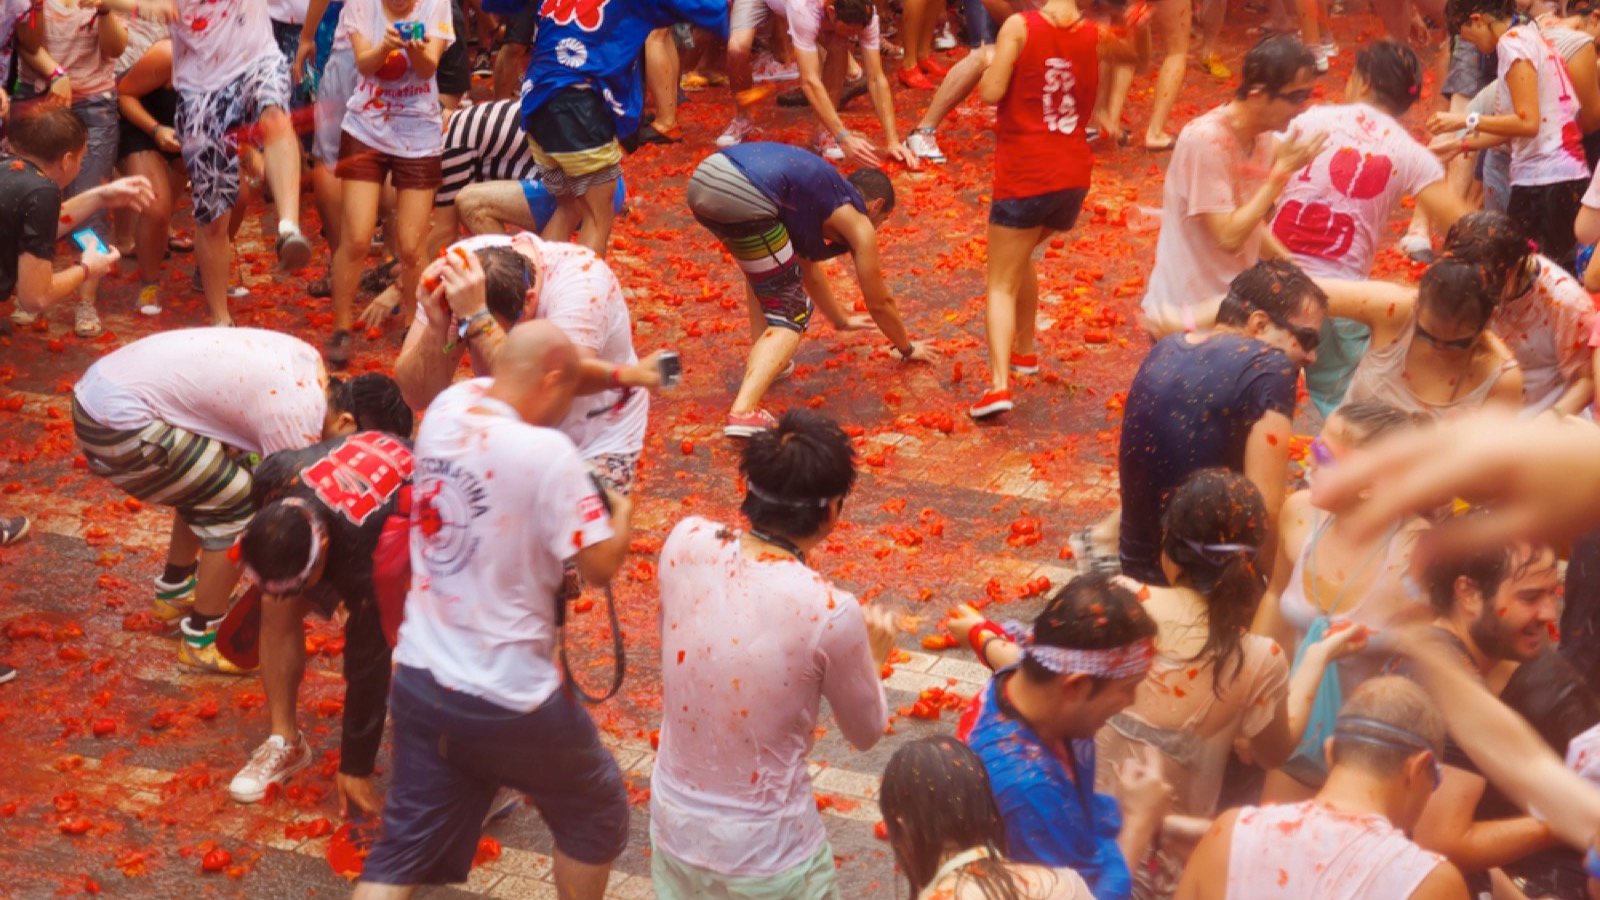 <p>Get your pitching arm ready if you find yourself in Bunol, Spain, in late August. This is an hour-long tomato fight. Participants chuck tomatoes at each other until they and the streets are covered in tomato juices. The first food fight started in 1940 and quickly became a national event that drew thousands worldwide.</p>